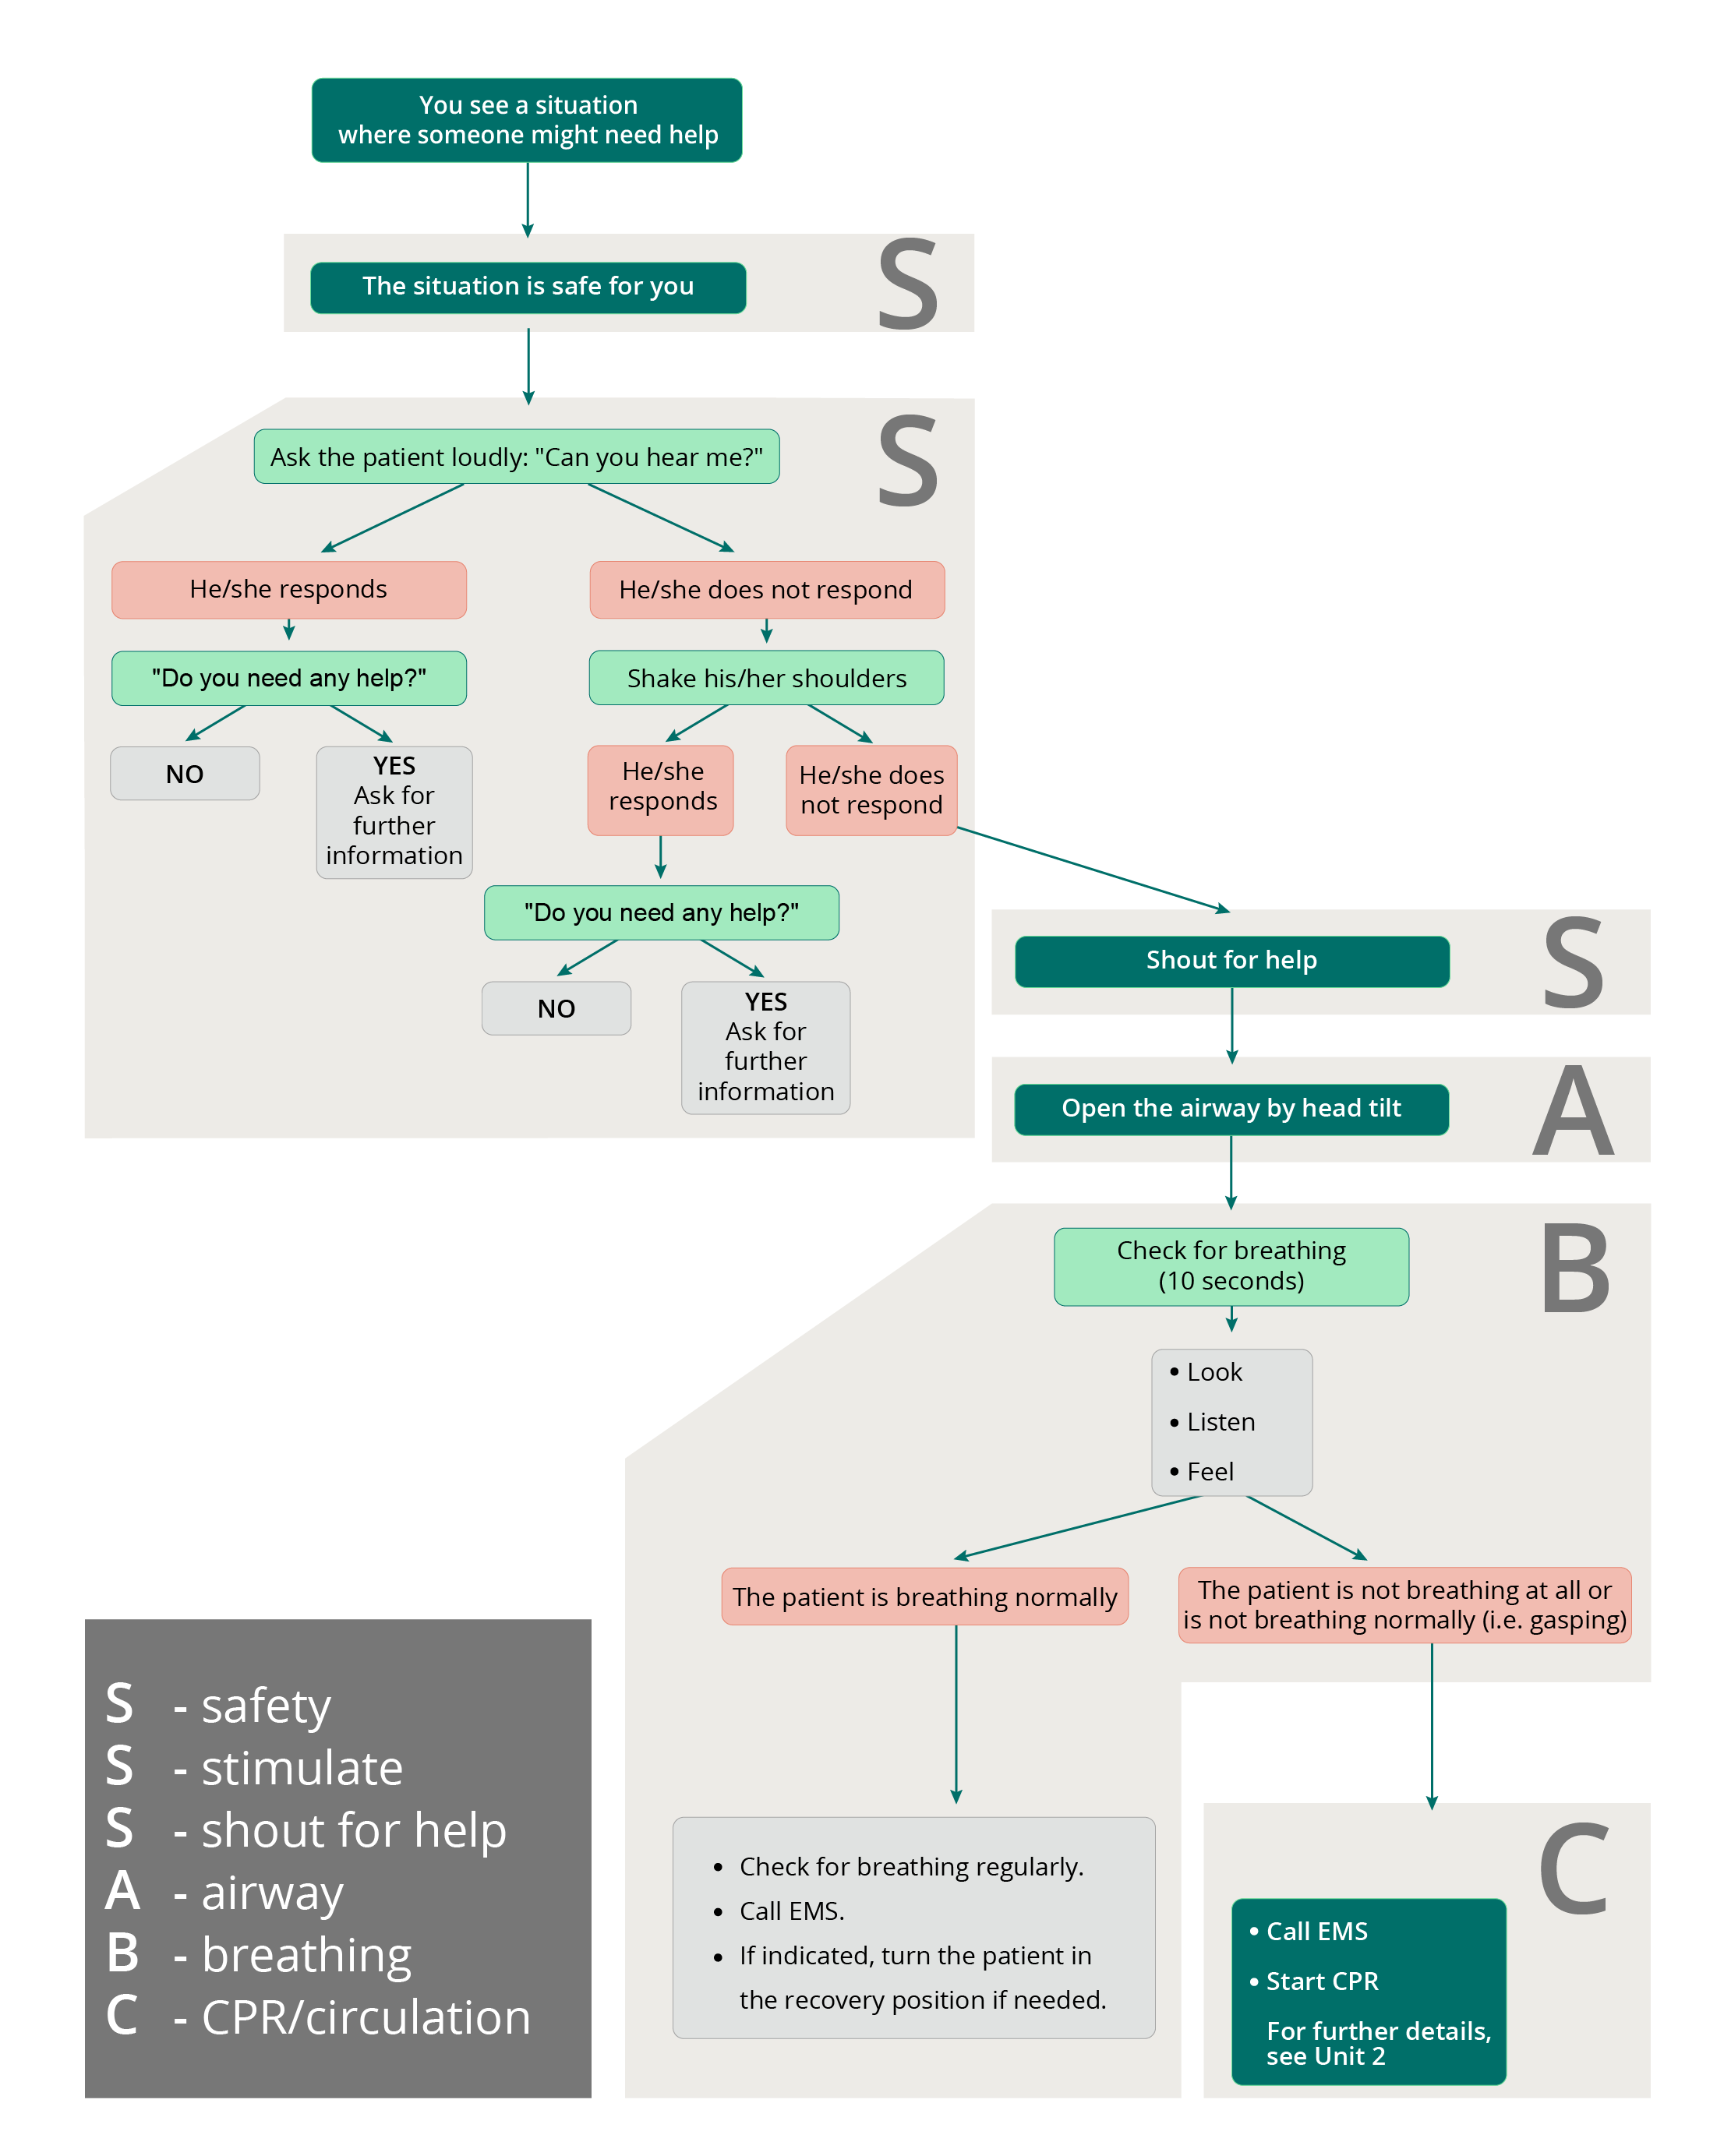 Algorithm of the approach to the unresponsive patient - SSS ABC